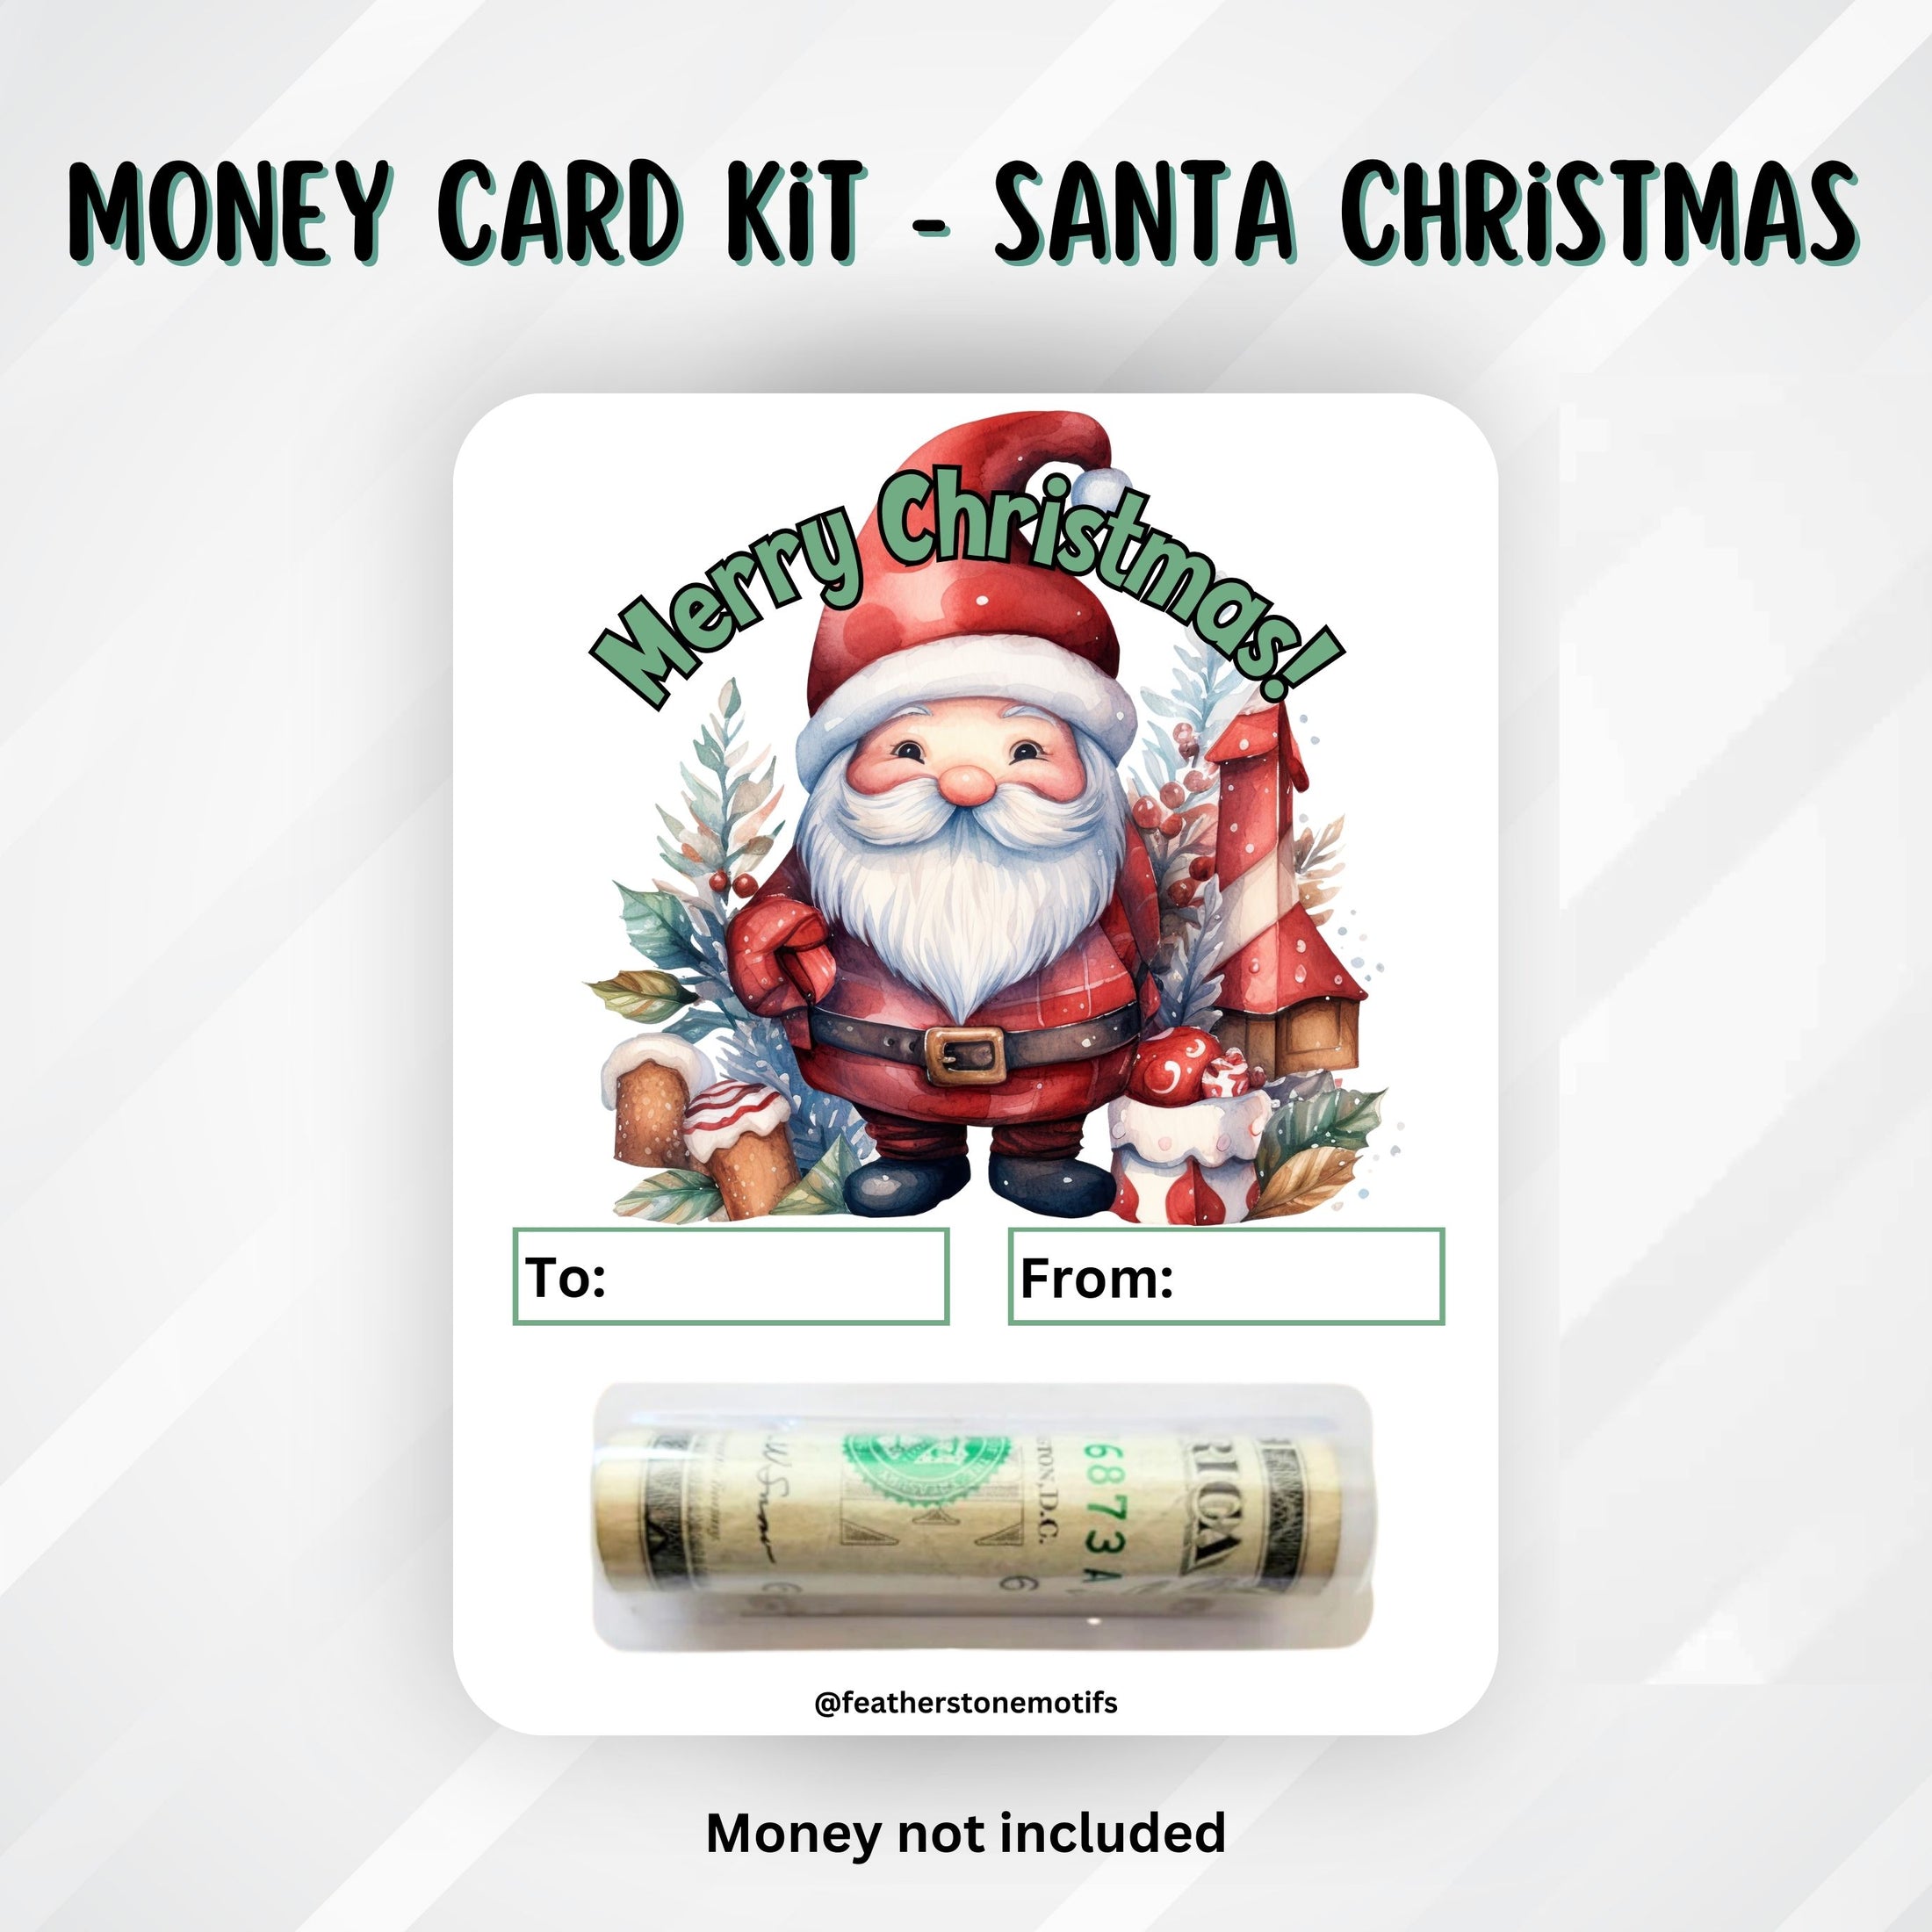 This image shows the Santa Christmas money card with money tube attached.